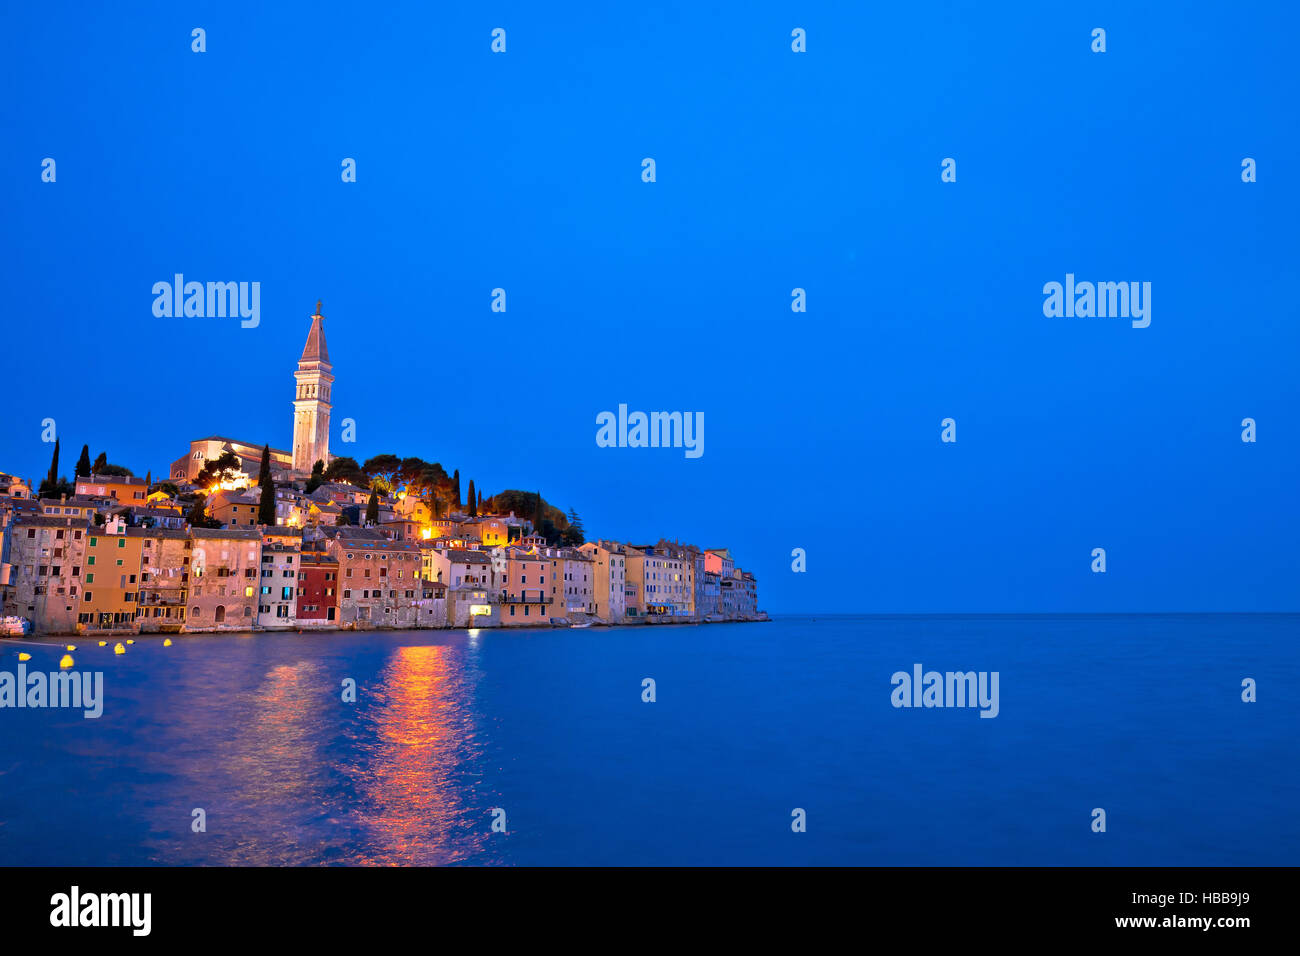 Town of Rovinj evening view with copyspace Stock Photo